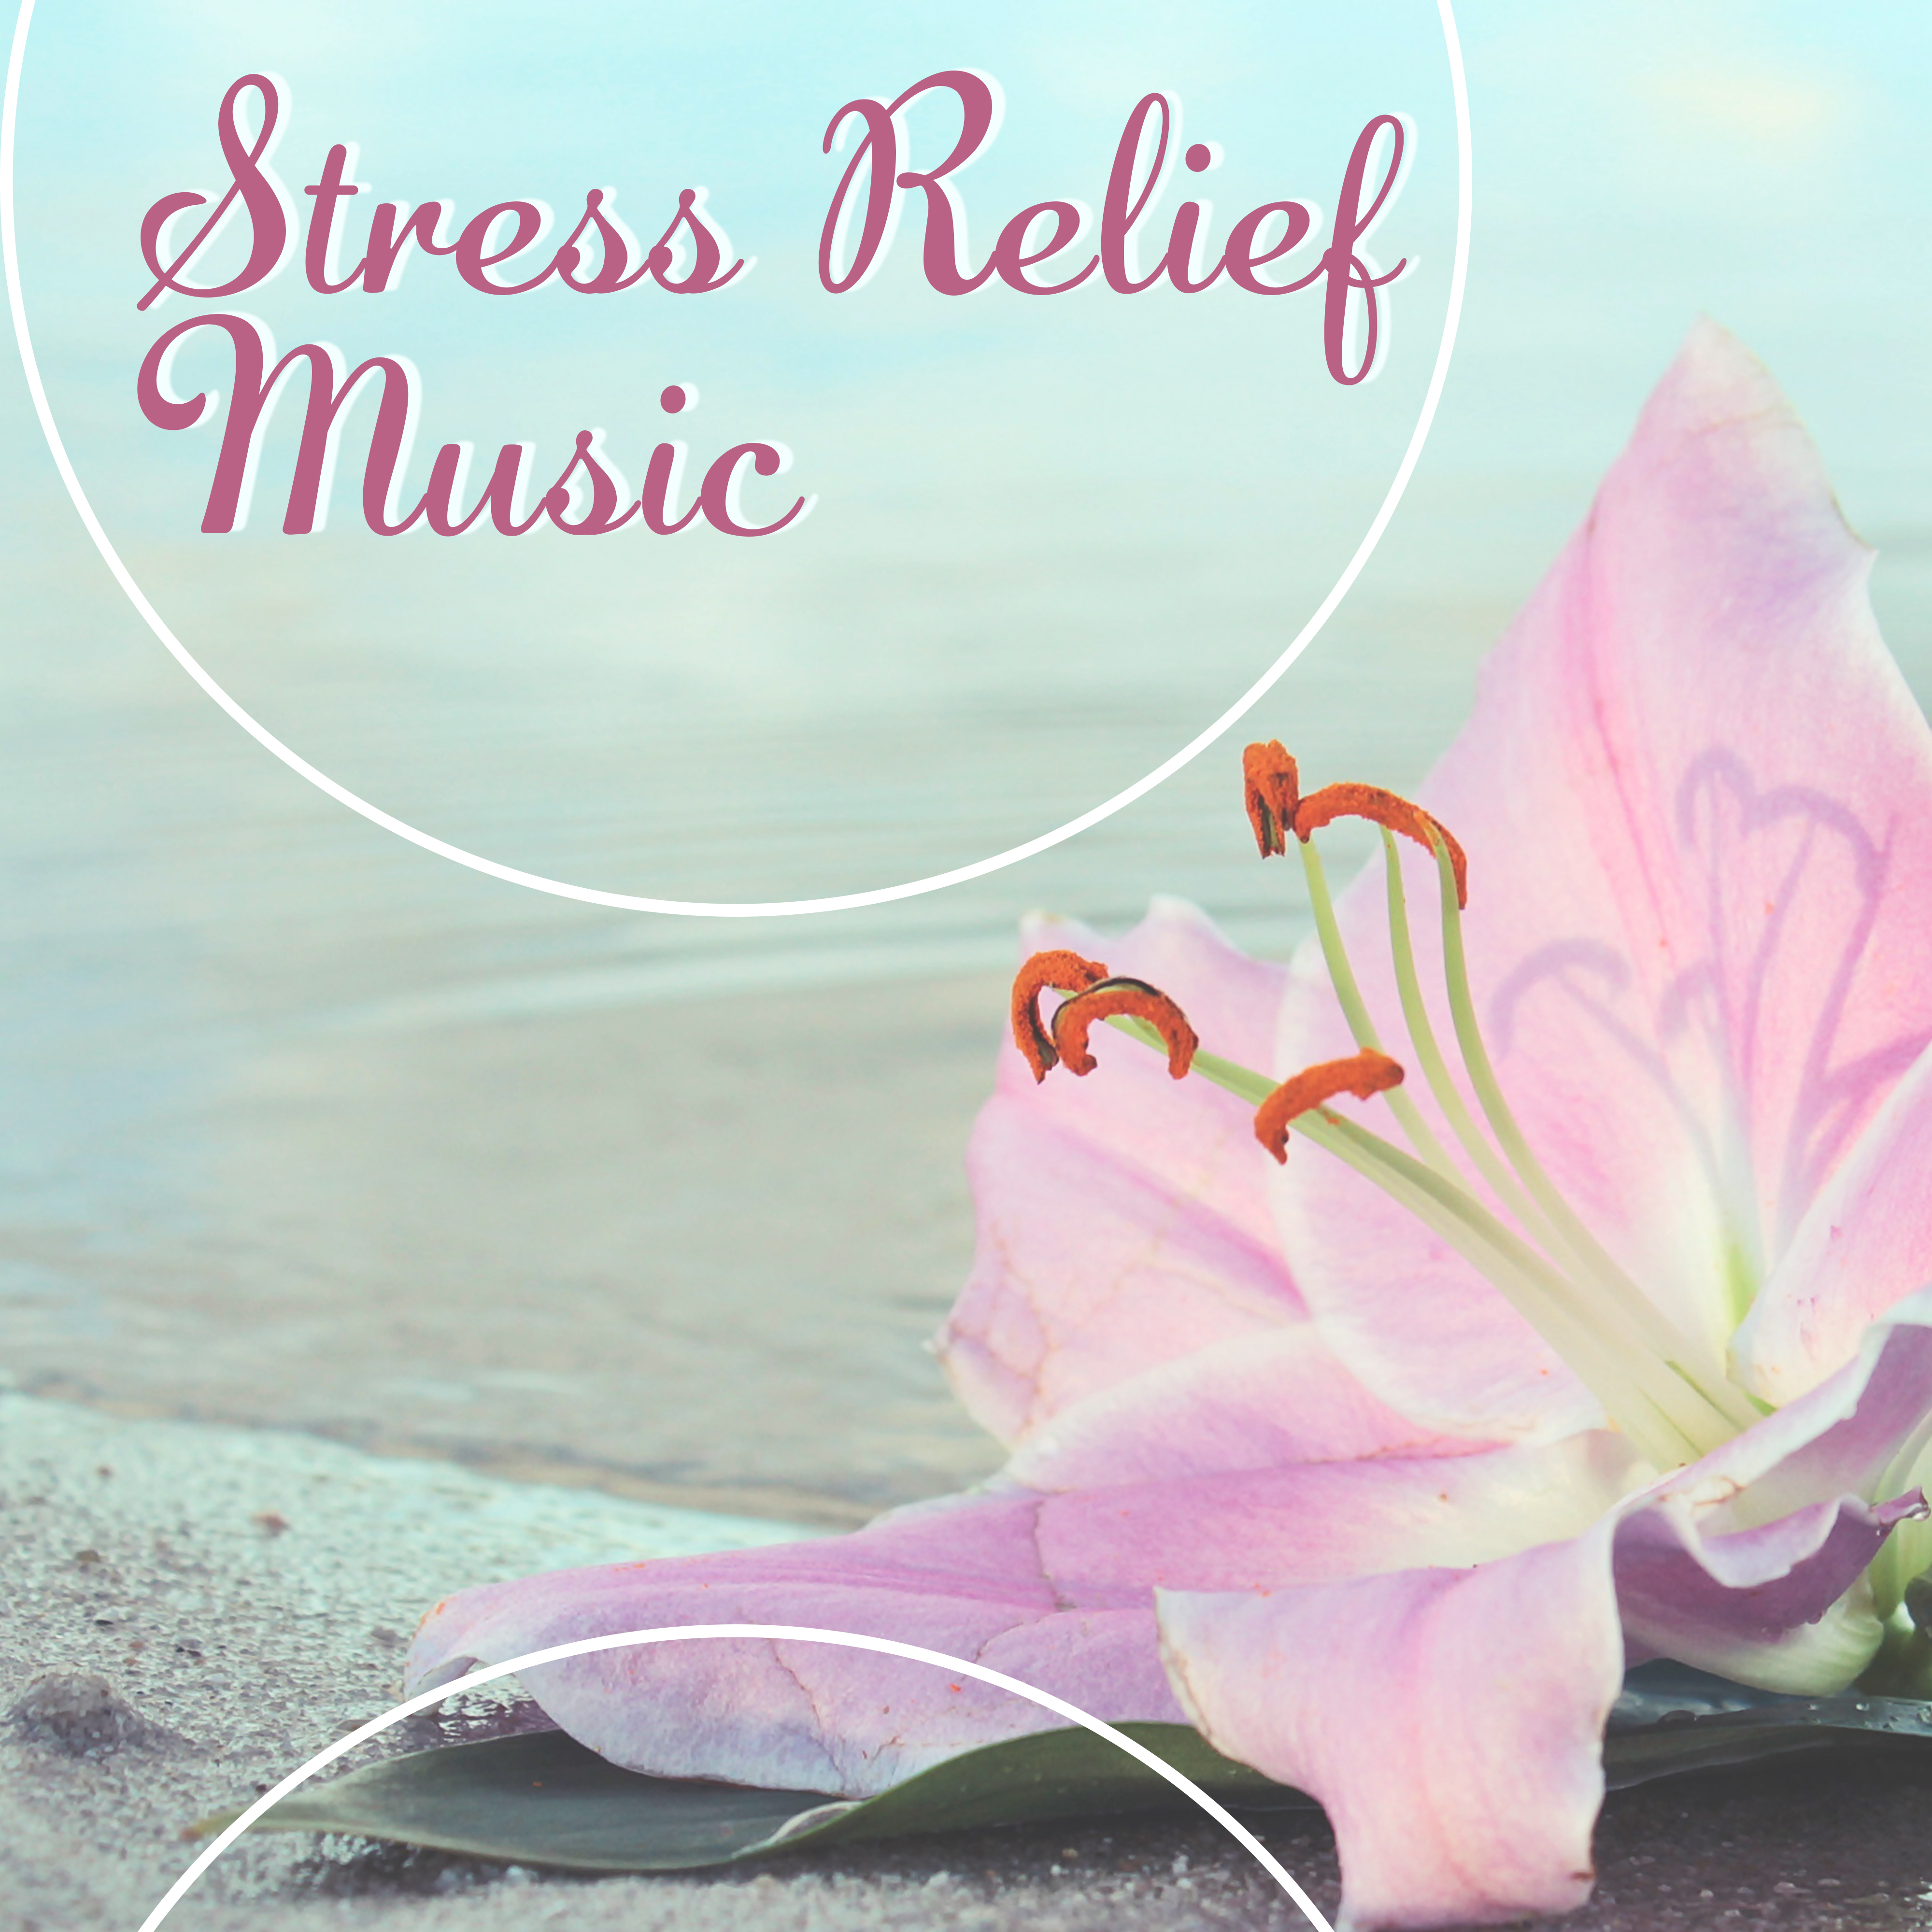 Stress Relief Music – Soothing Sounds for Spa, Wellness, Deep Massage, Healing Water, Oriental Music for Relax, Spa Dreams, Nature Sounds